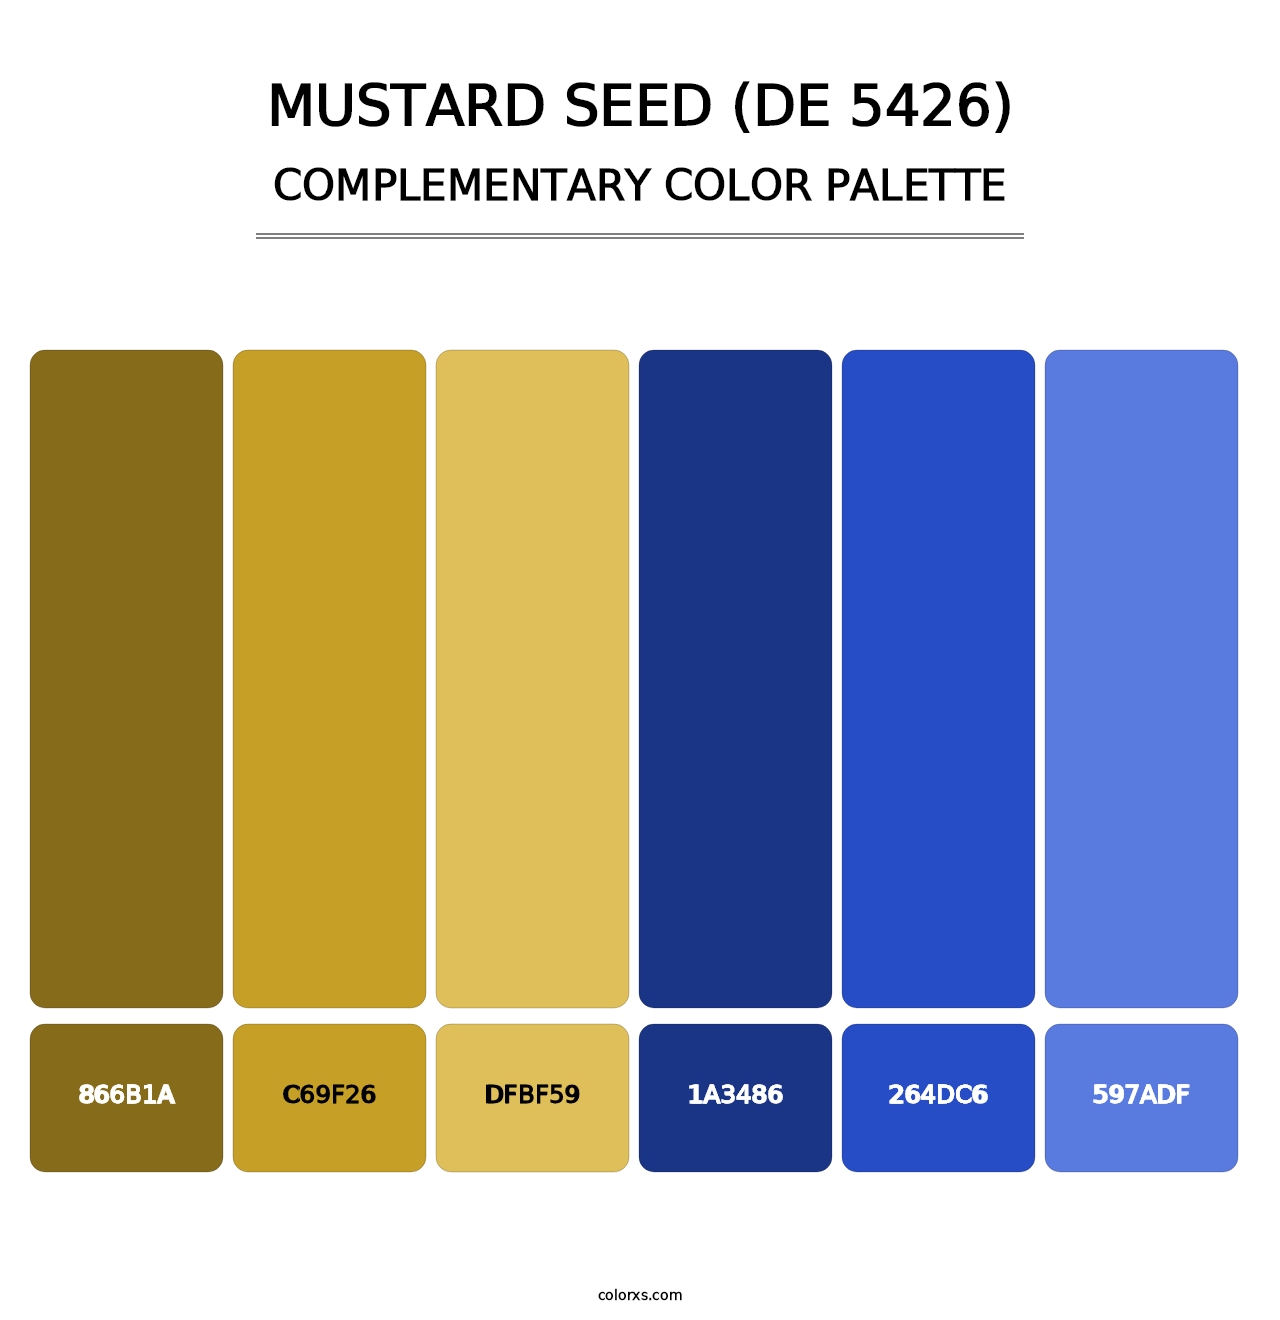 Mustard Seed (DE 5426) - Complementary Color Palette